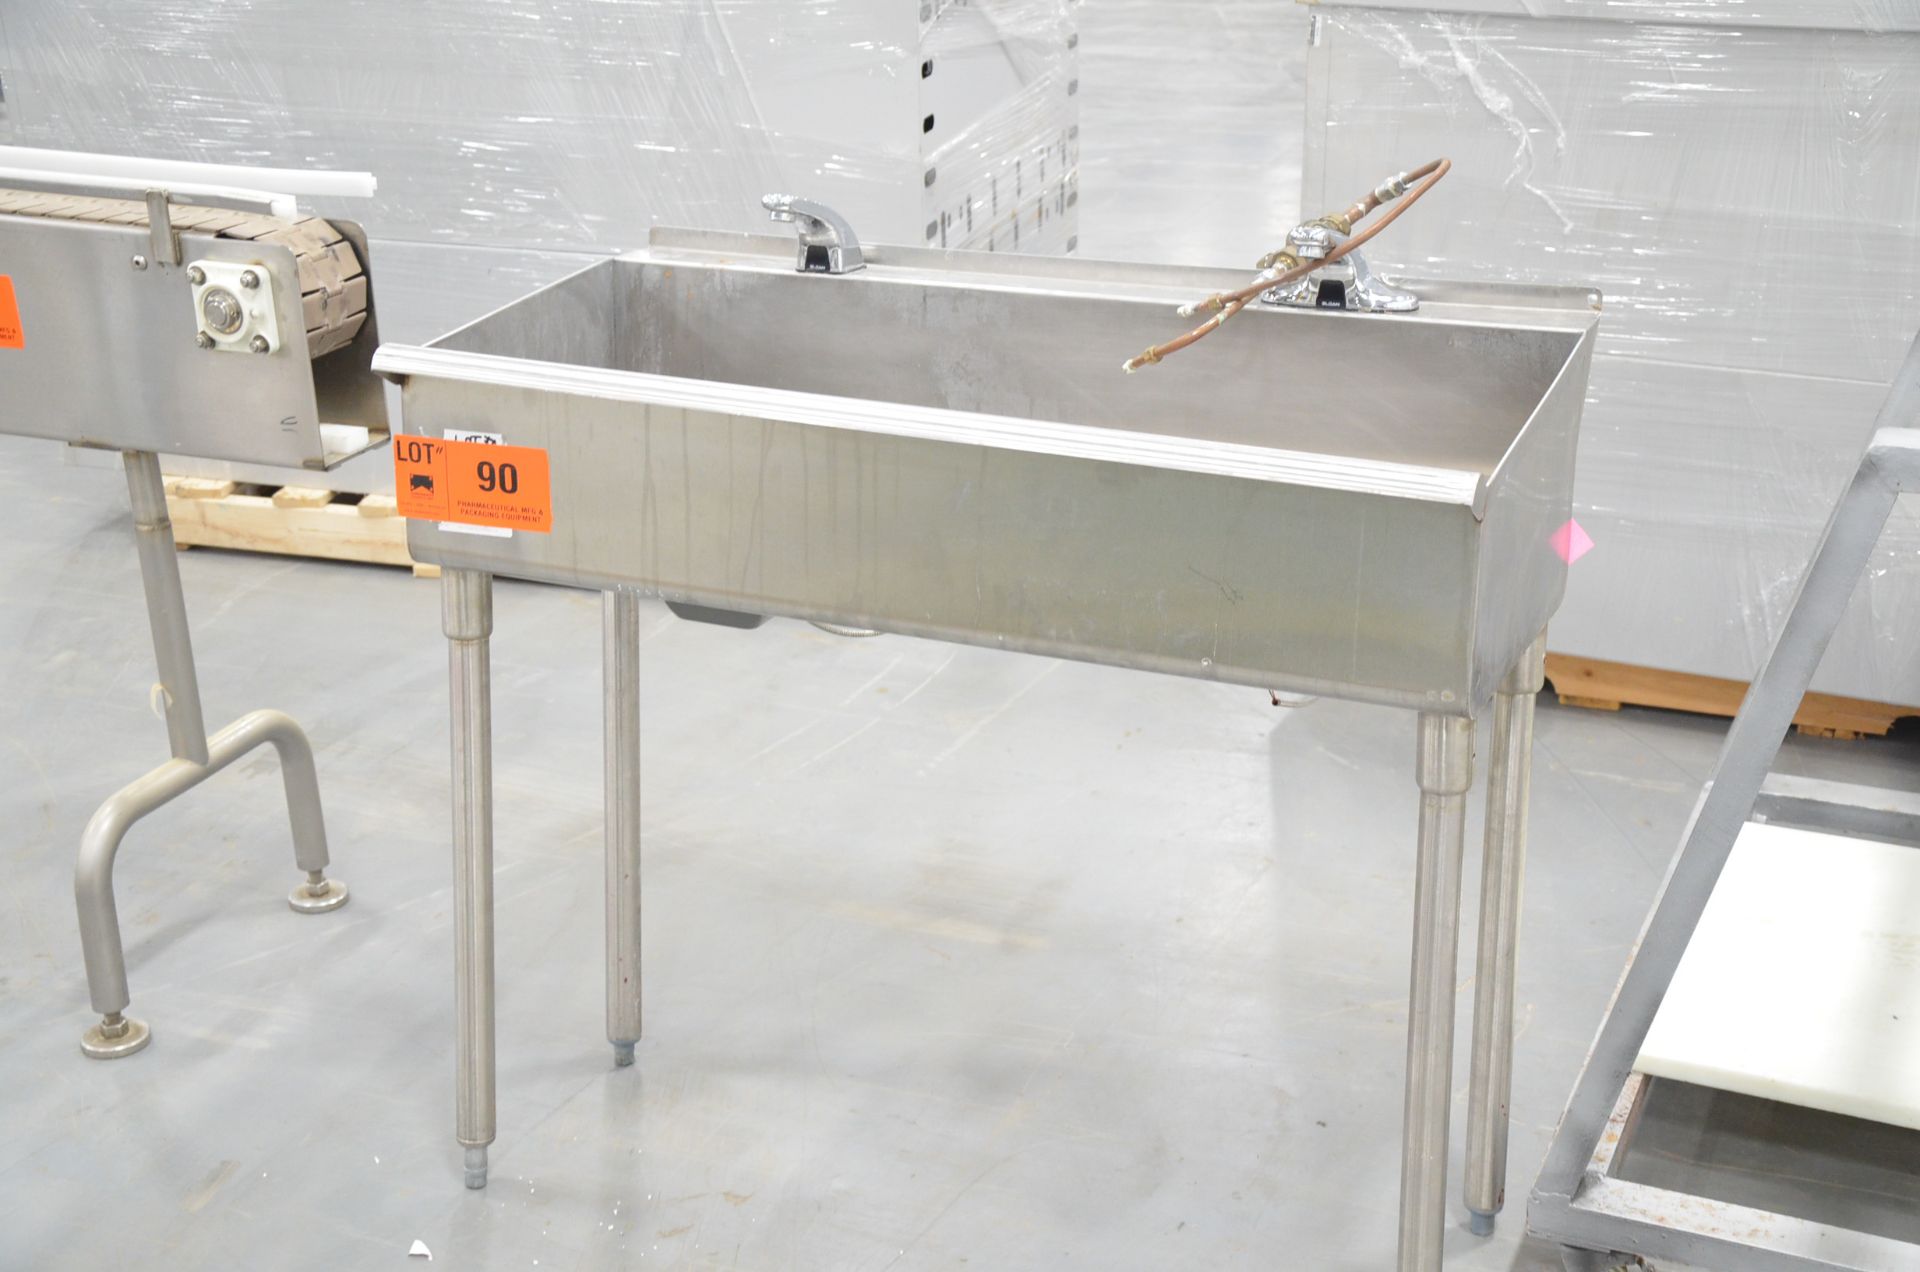 42"X16"X9" DOUBLE FAUCET STAINLESS STEEL SINK, S/N: N/A [OPTIONAL PACKAGING FEE $5 USD +